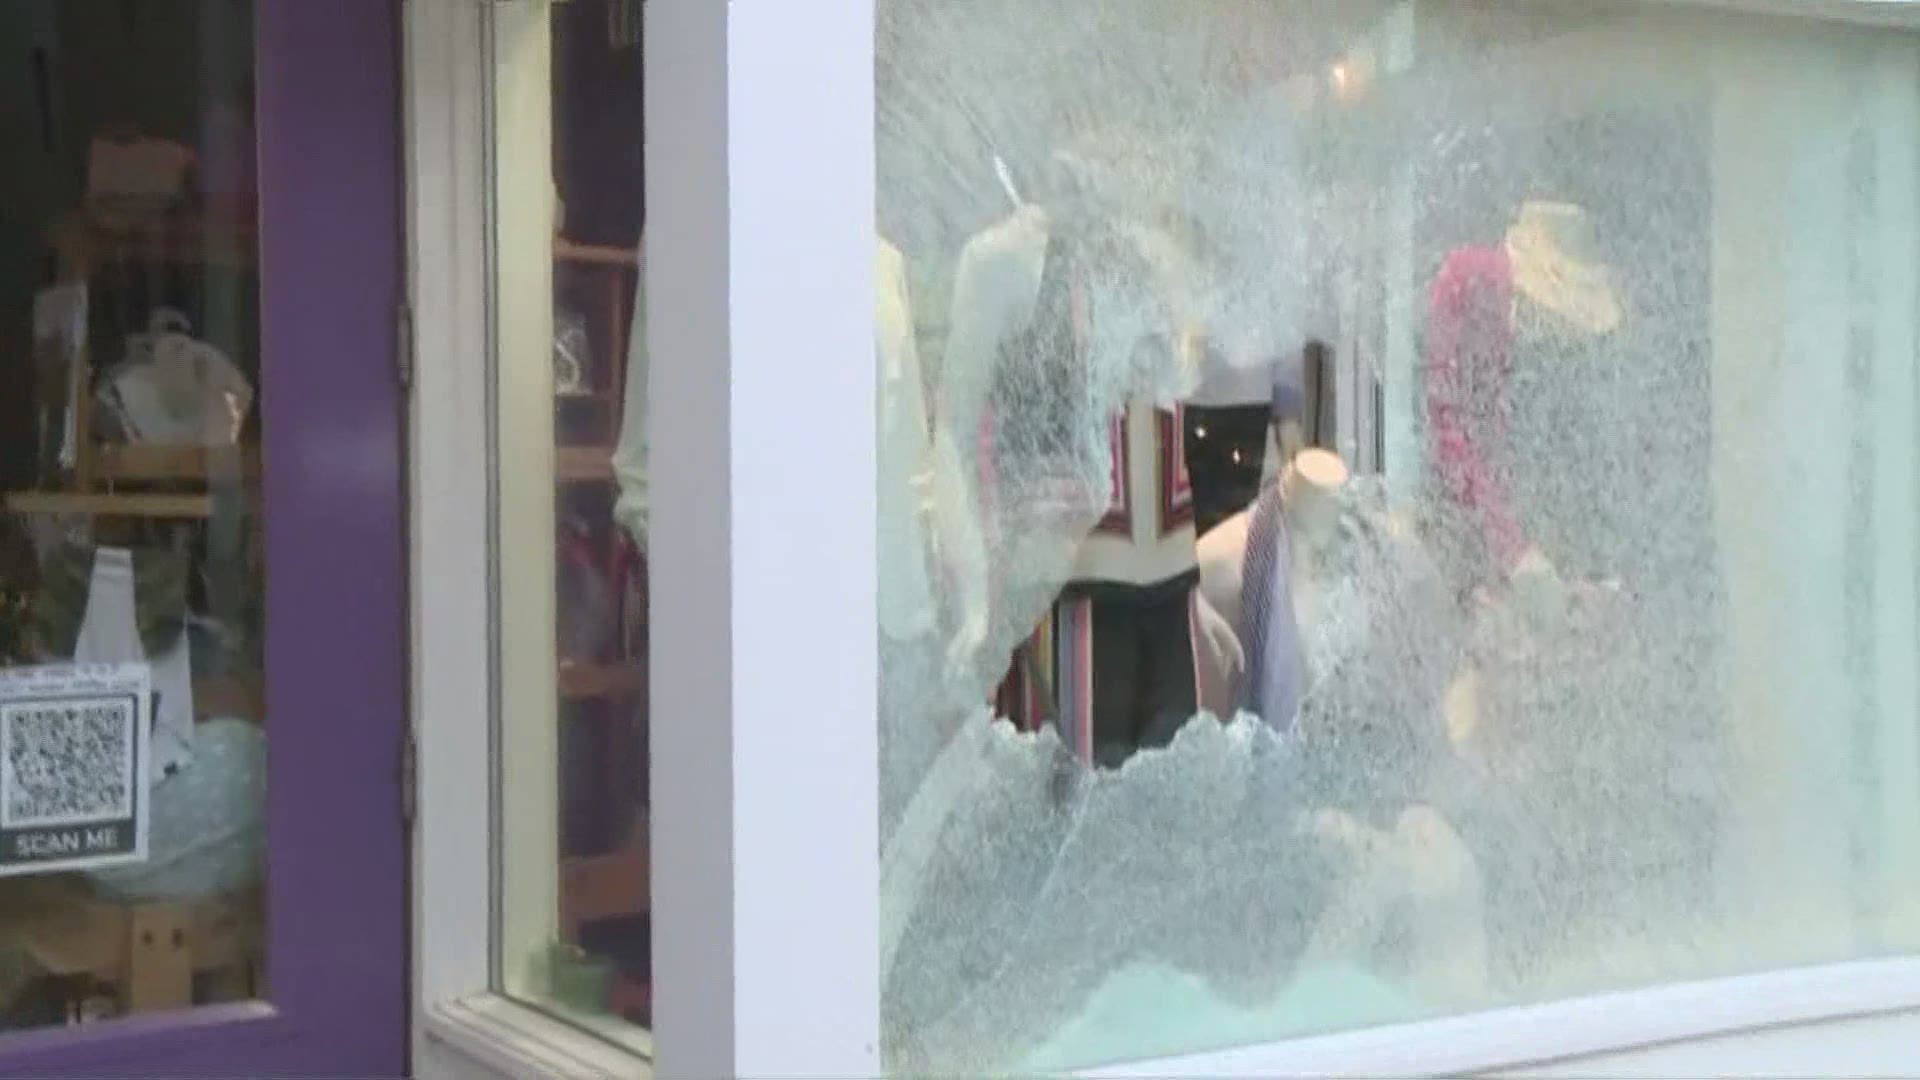 A look at the damage following unrest in downtown Kalamazoo Monday evening